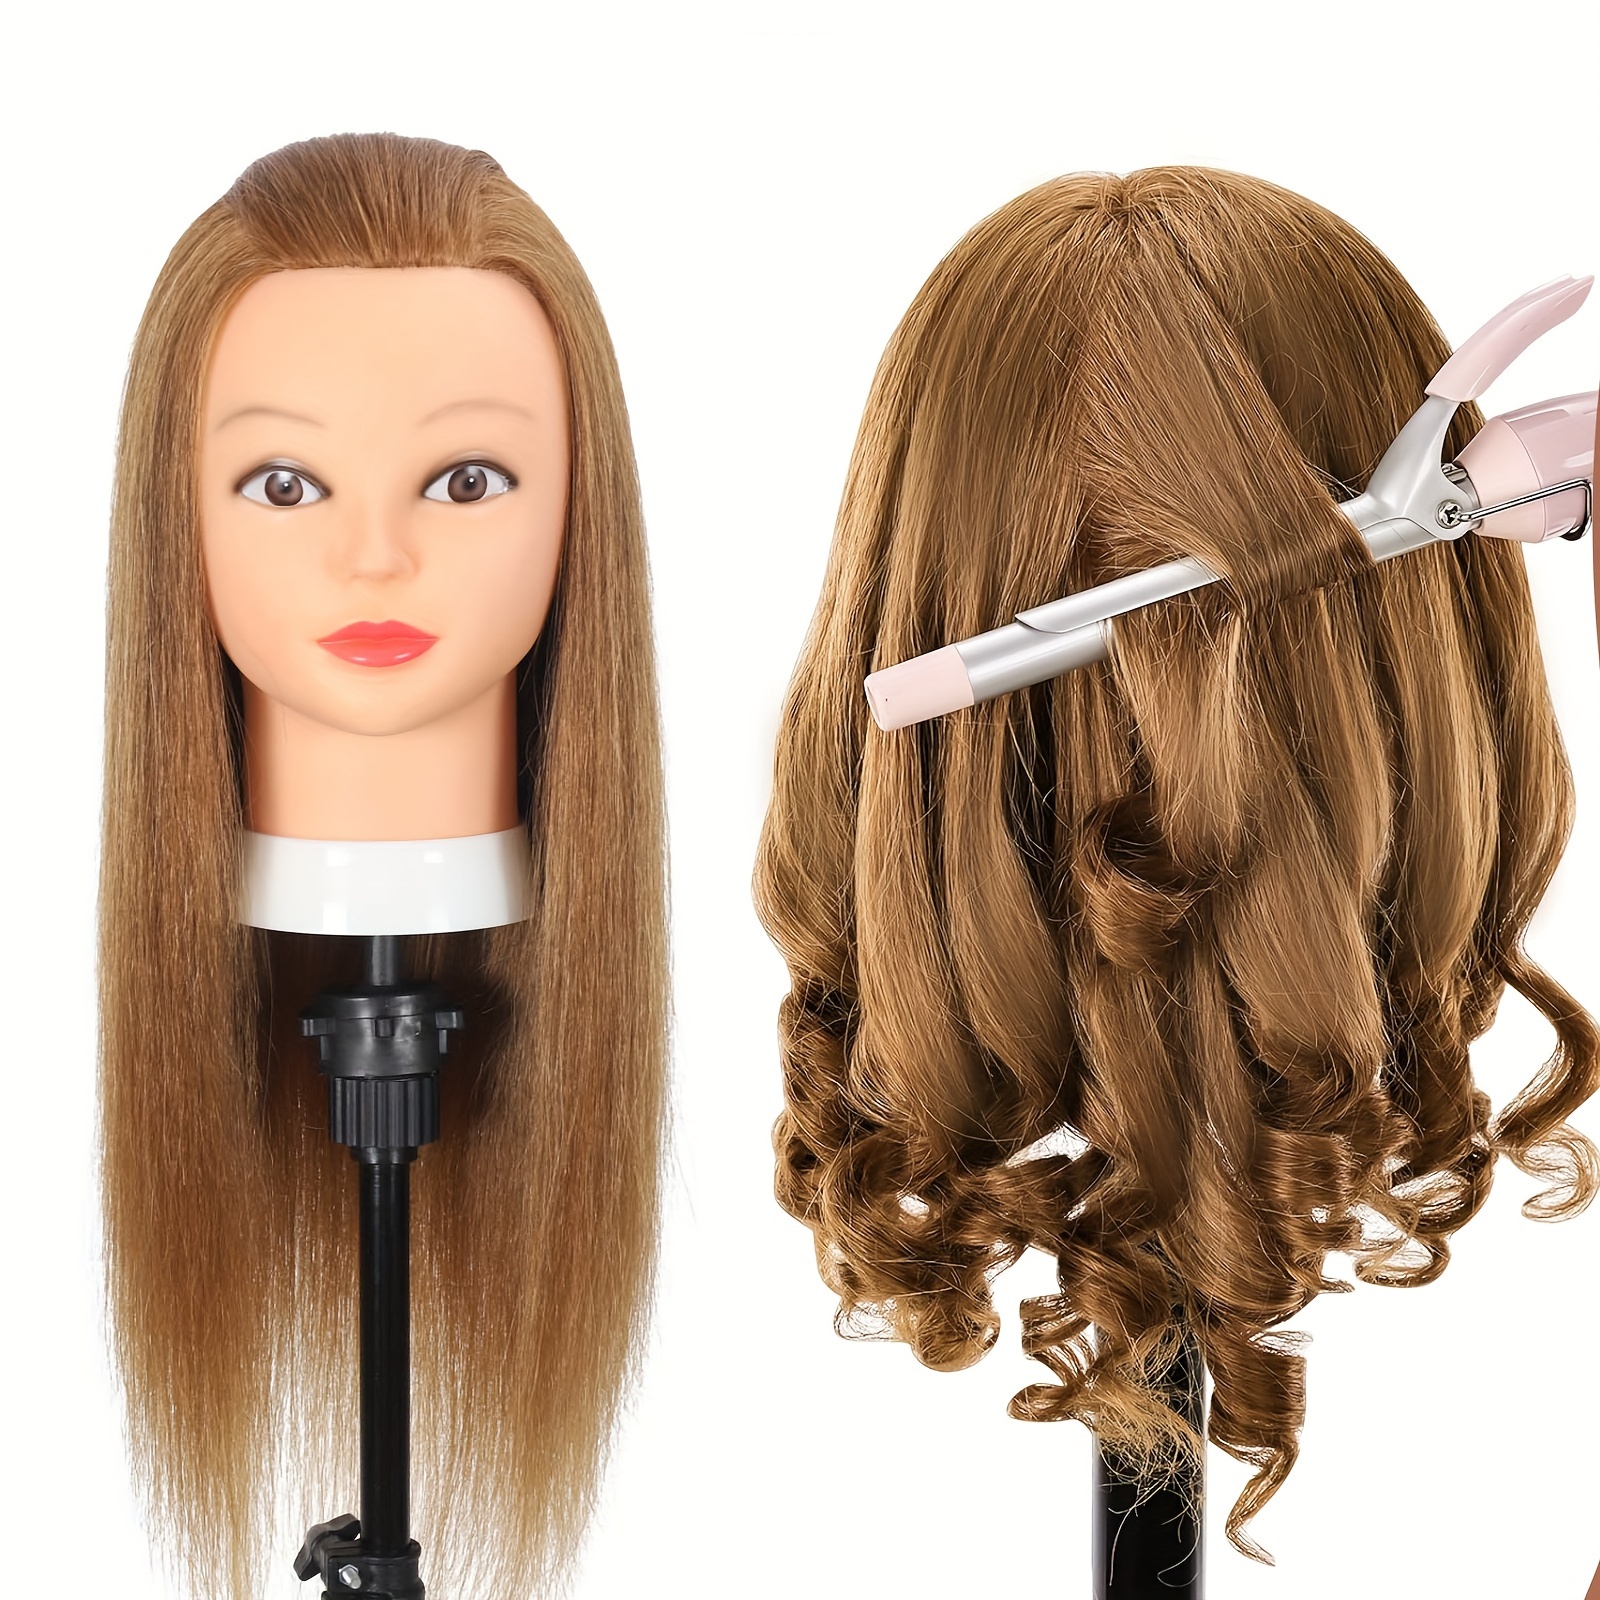 

100% Real Hair Mannequin Head With Human Hair Hairdresser Cosmetology Mannequin Manikin Training Practice Styling Doll Head With Free Clamp Holder